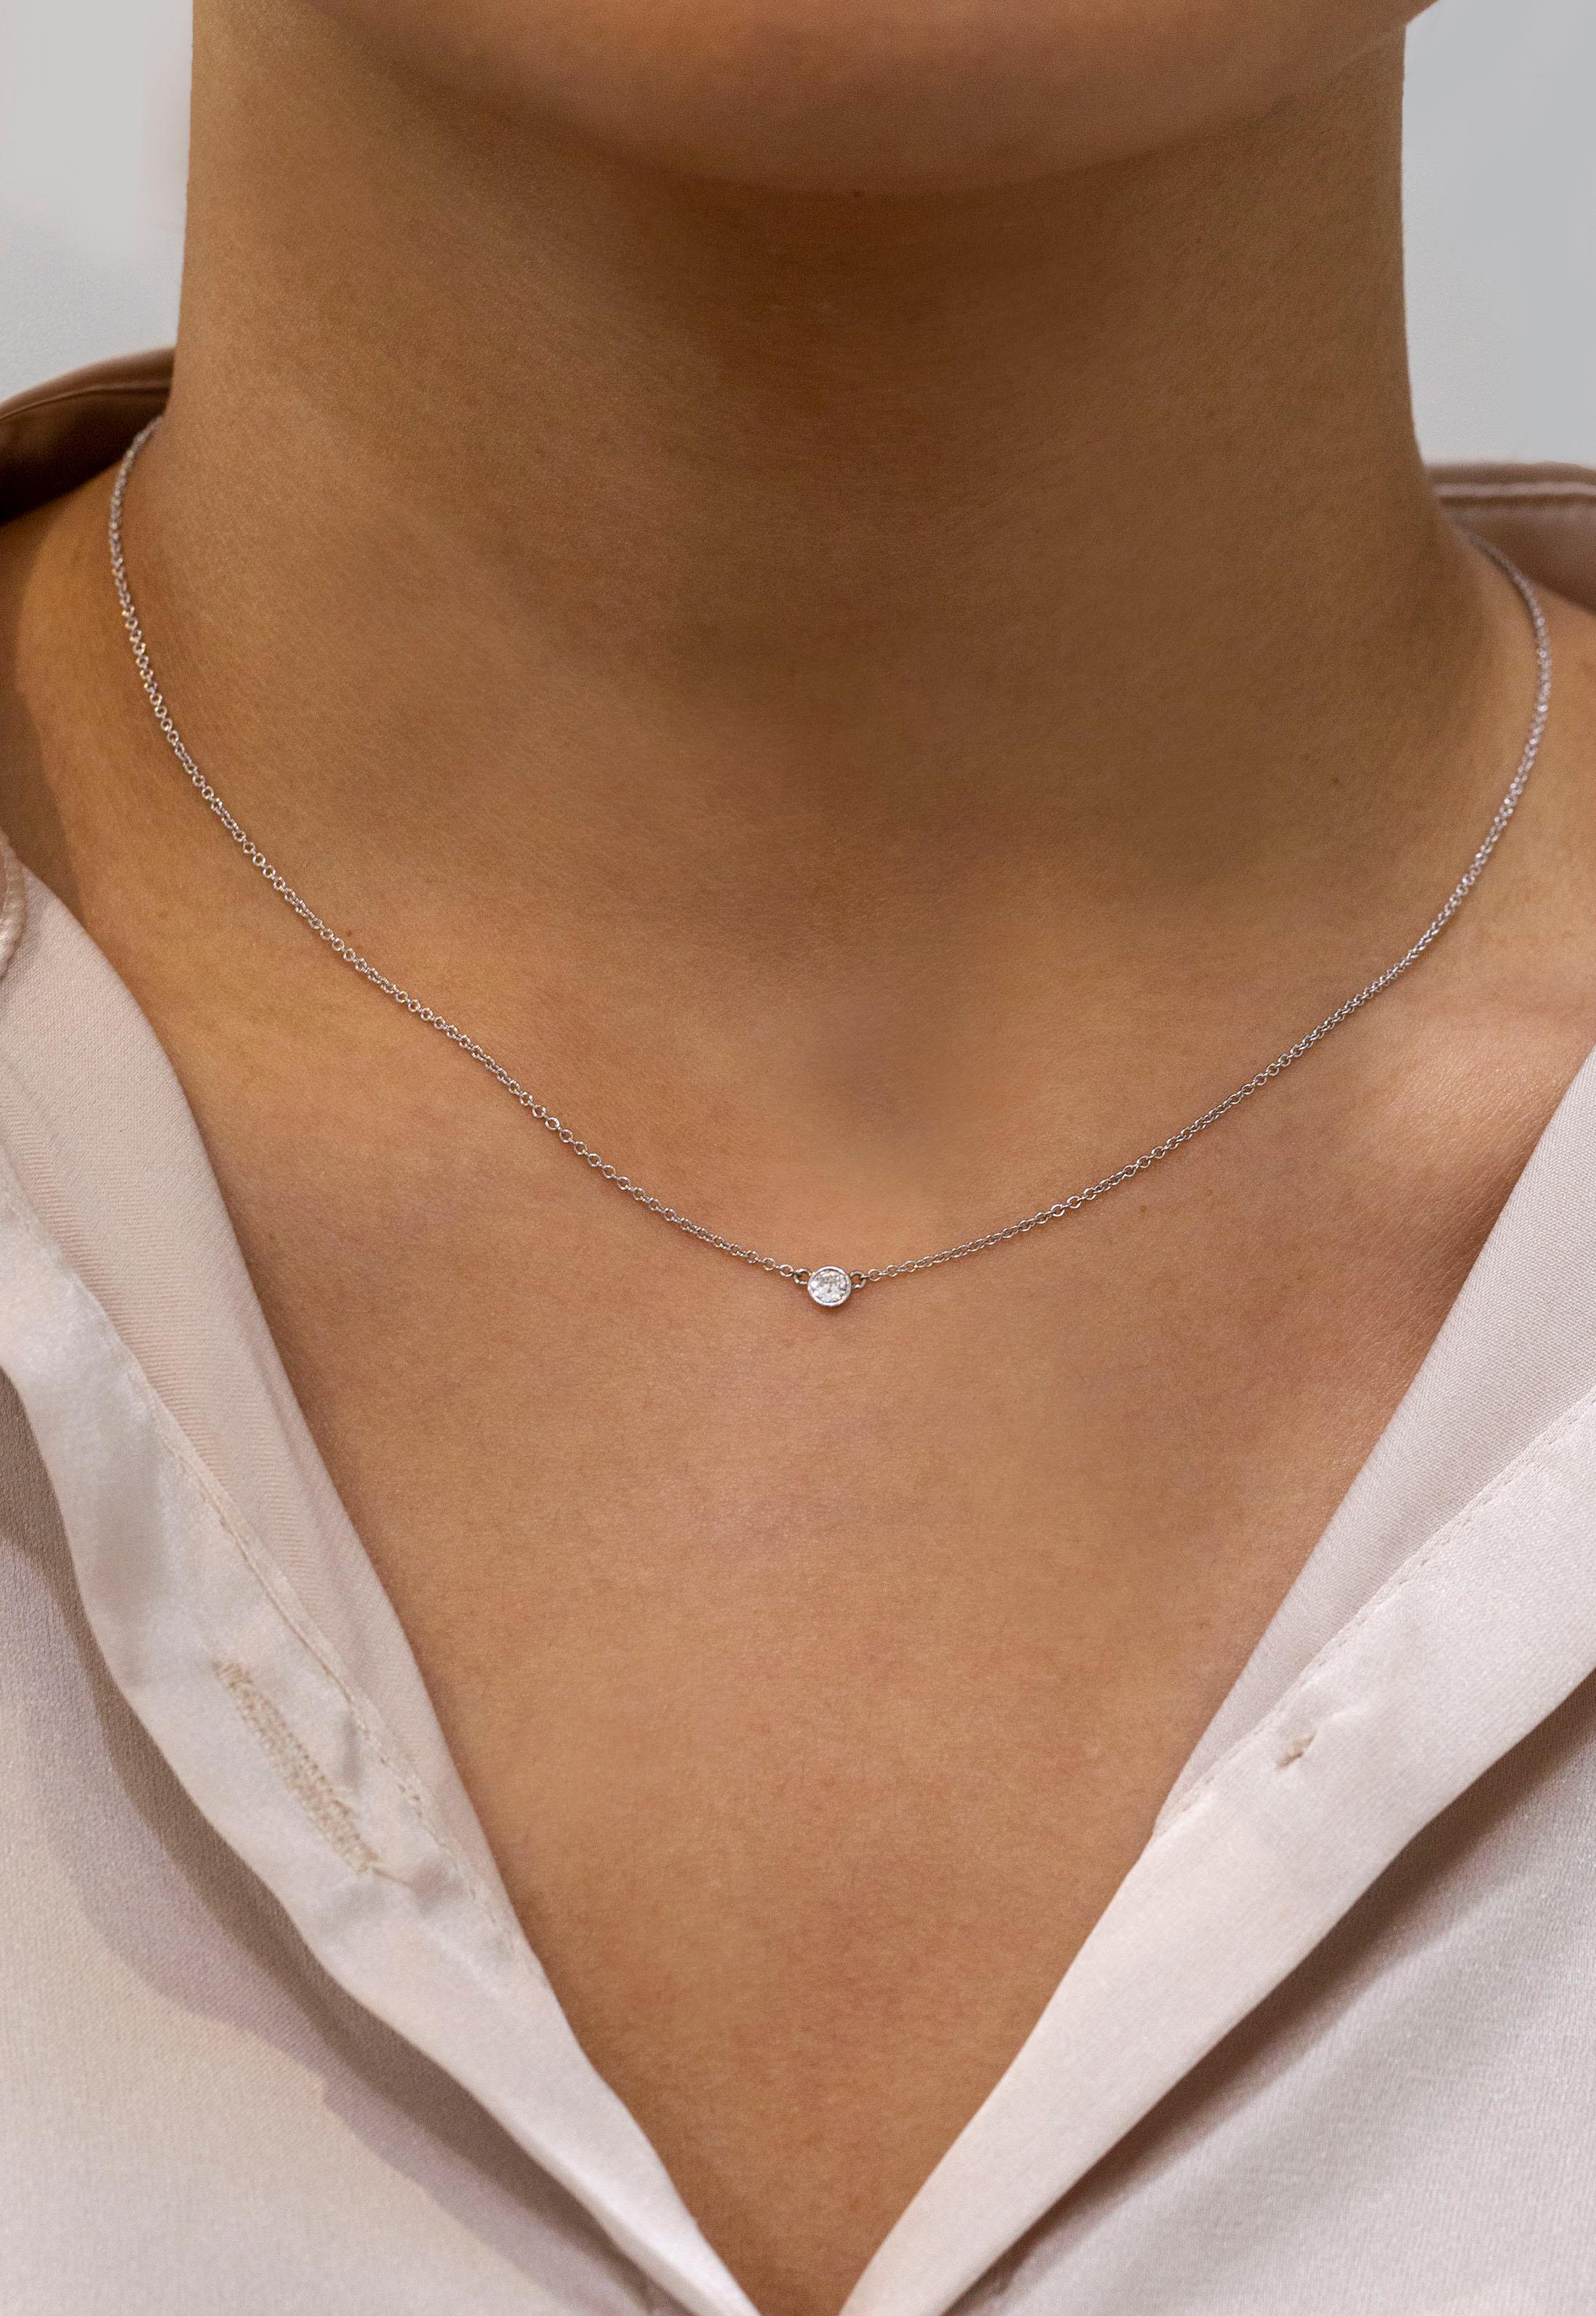 A simple and versatile solitaire pendant necklace showcasing a single 0.07 carat round diamond set in a 14K White Gold bezel. Attached to a 16 inch with an interval at 15 inch 14K White Gold Chain. 

Roman Malakov is a custom house, specializing in